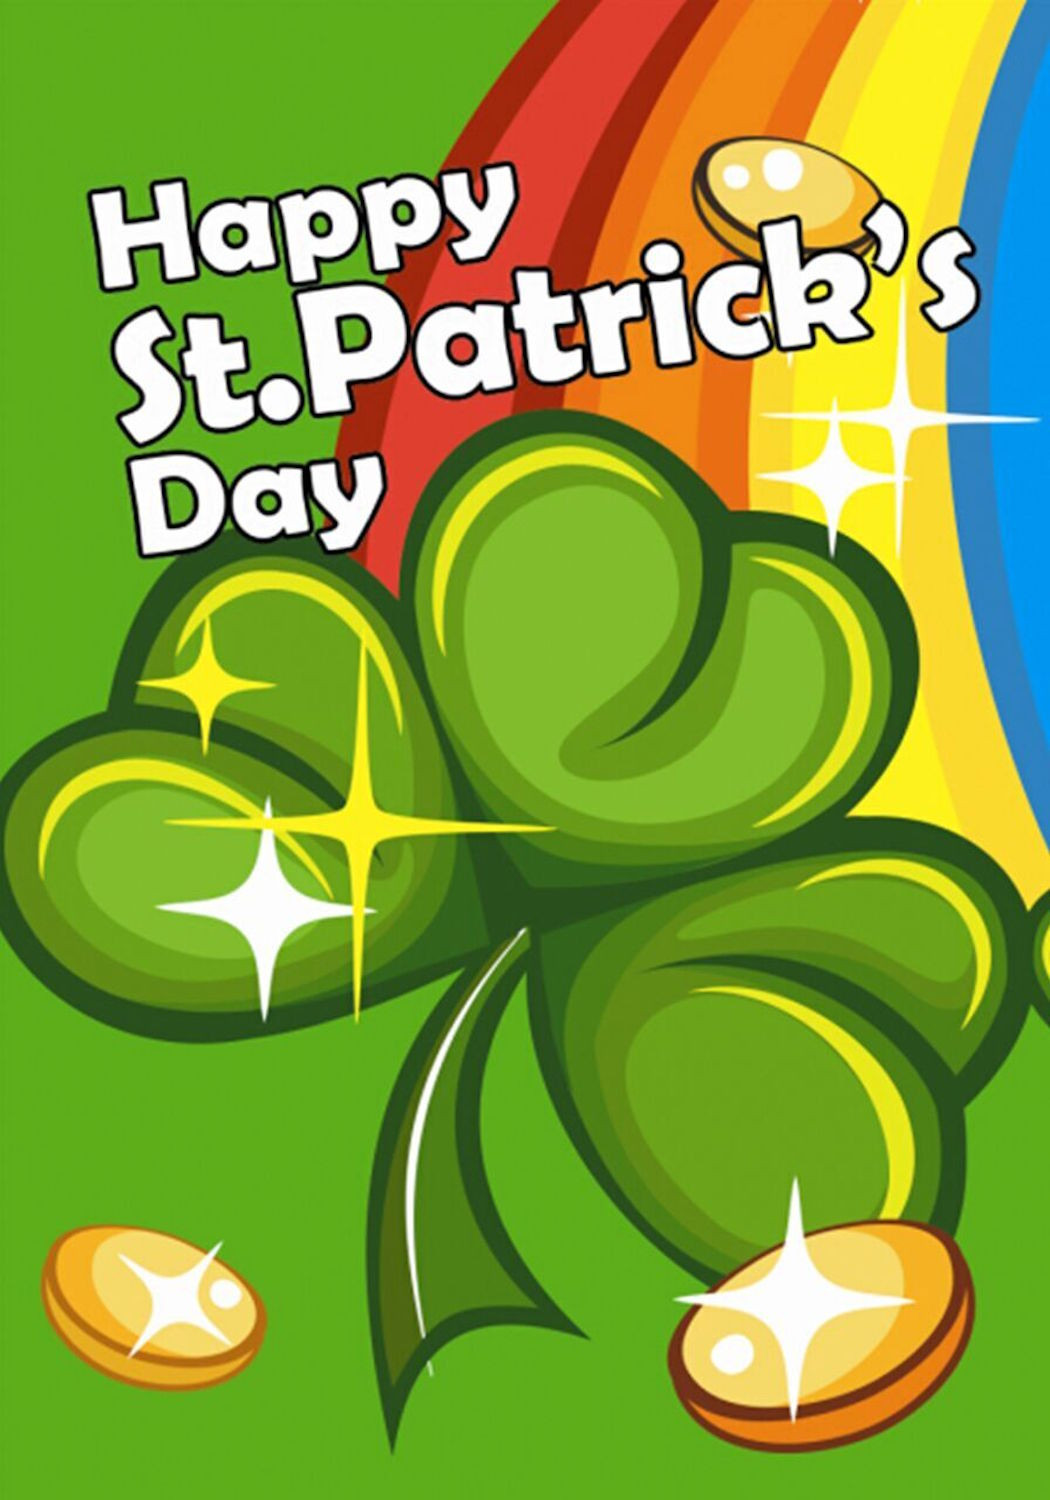 St Patrick's Day Quotes And Images
 St Patrick s Day Rainbow Garden Flag Shamrock Coins 12 5